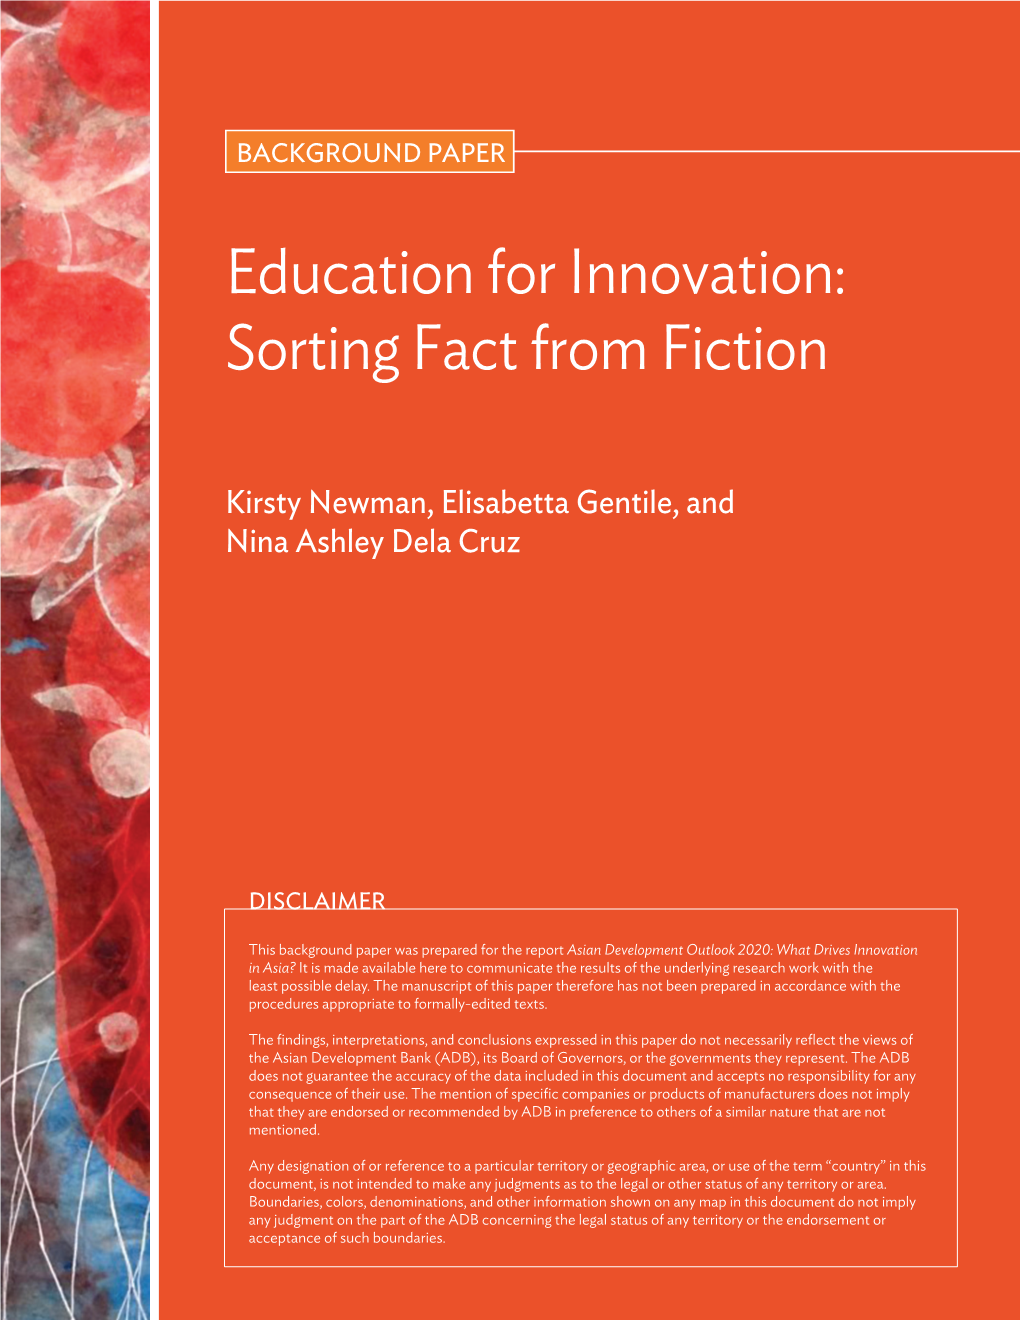 Education for Innovation: Sorting Fact from Fiction